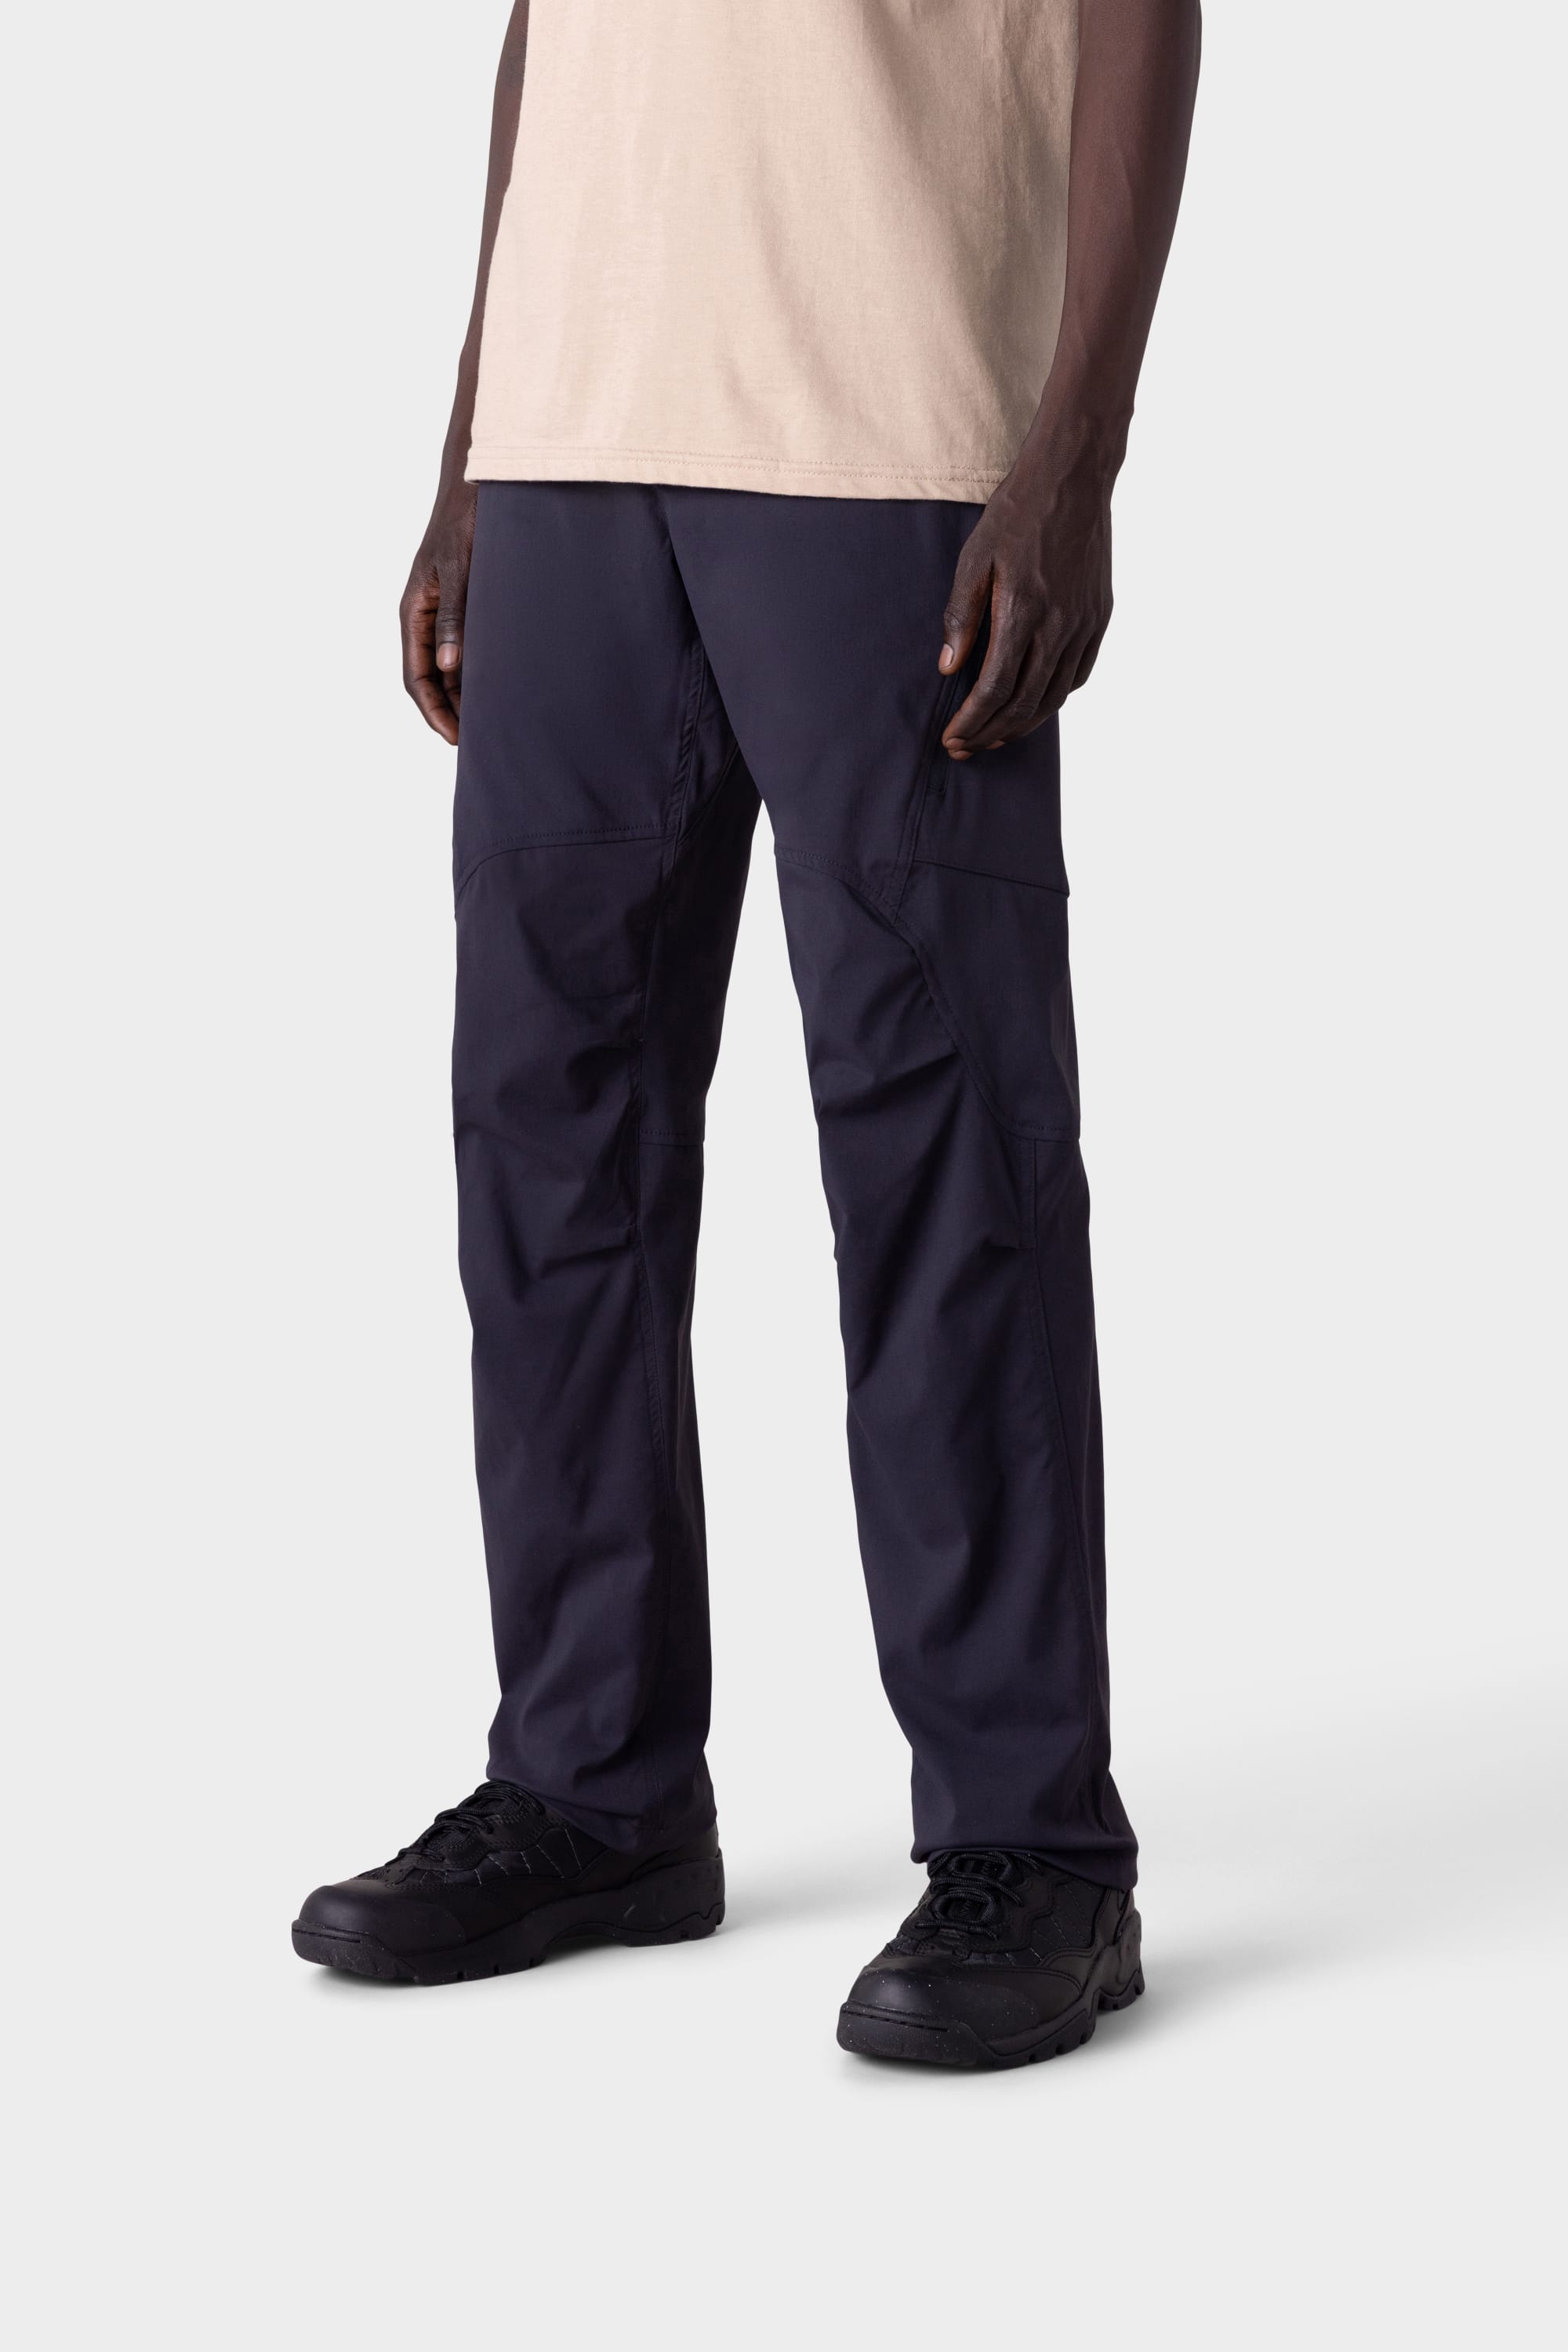 686 Men's Anything Cargo Pant - Relaxed Fit –